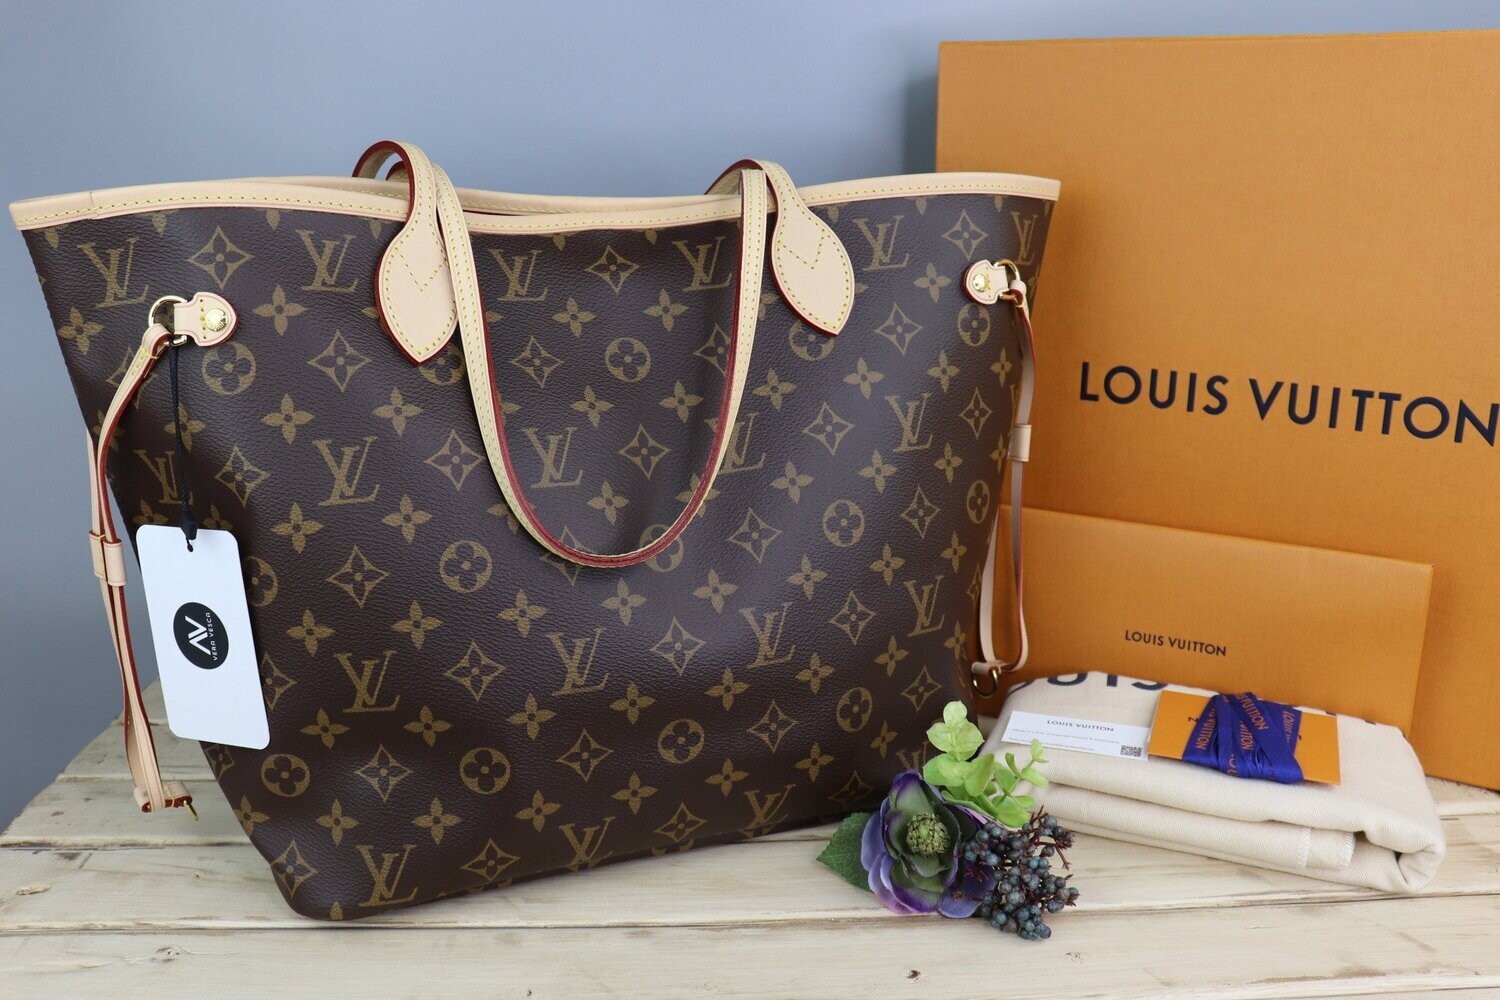 Louis Vuitton Coffee Cup 2021 Fall Winter Collection Shoulder Bag w/Dust Bag  BOX